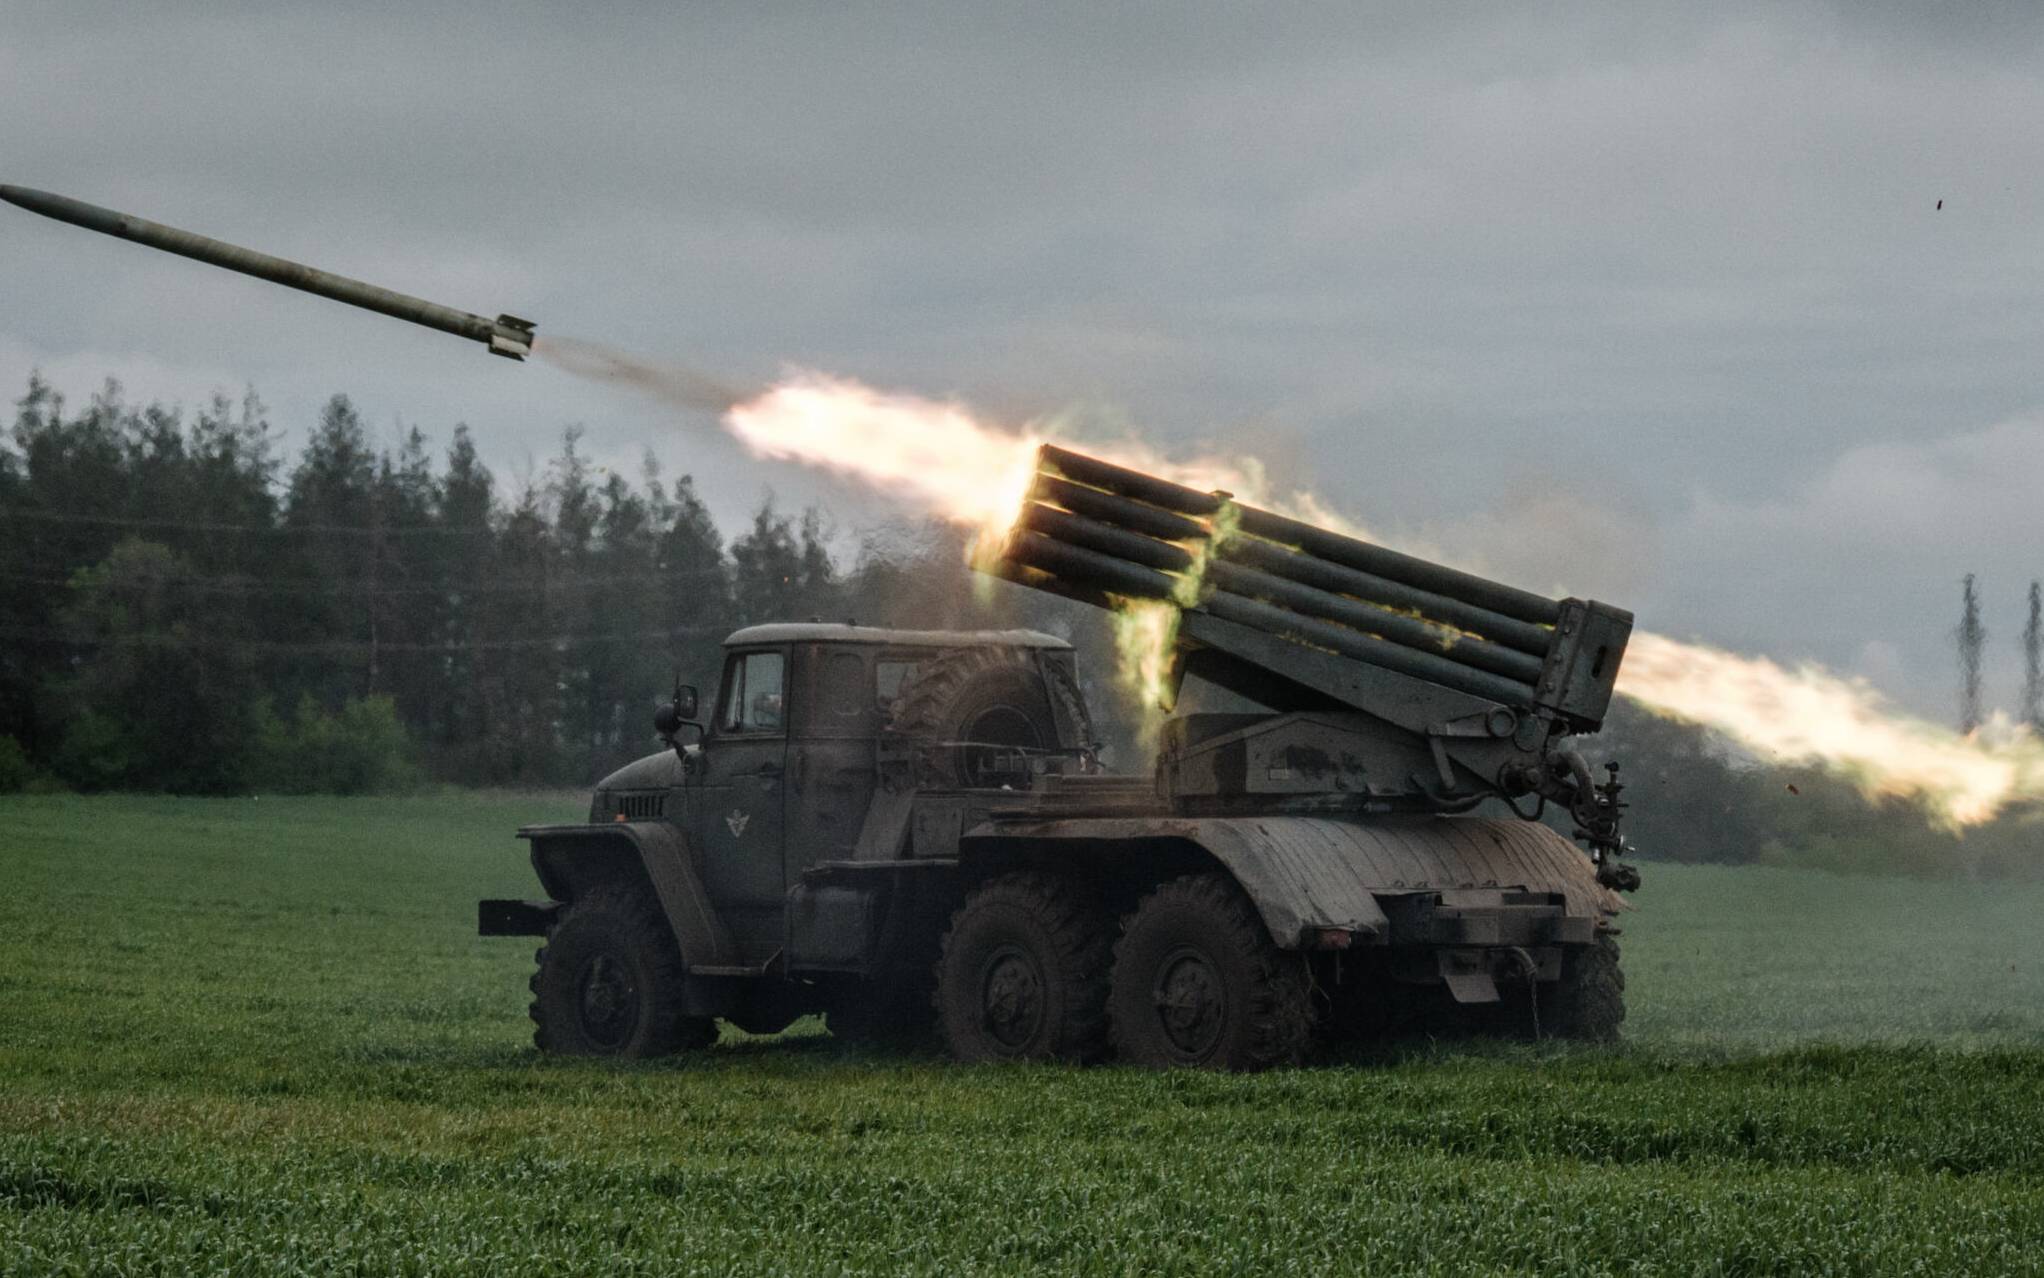 A rocket is launched from a truck-mounted multiple rocket launcher near Svyatohirsk, eastern Ukraine, on May 14, 2022, amid the Russian invasion of Ukraine. (Photo by Yasuyoshi CHIBA / AFP)